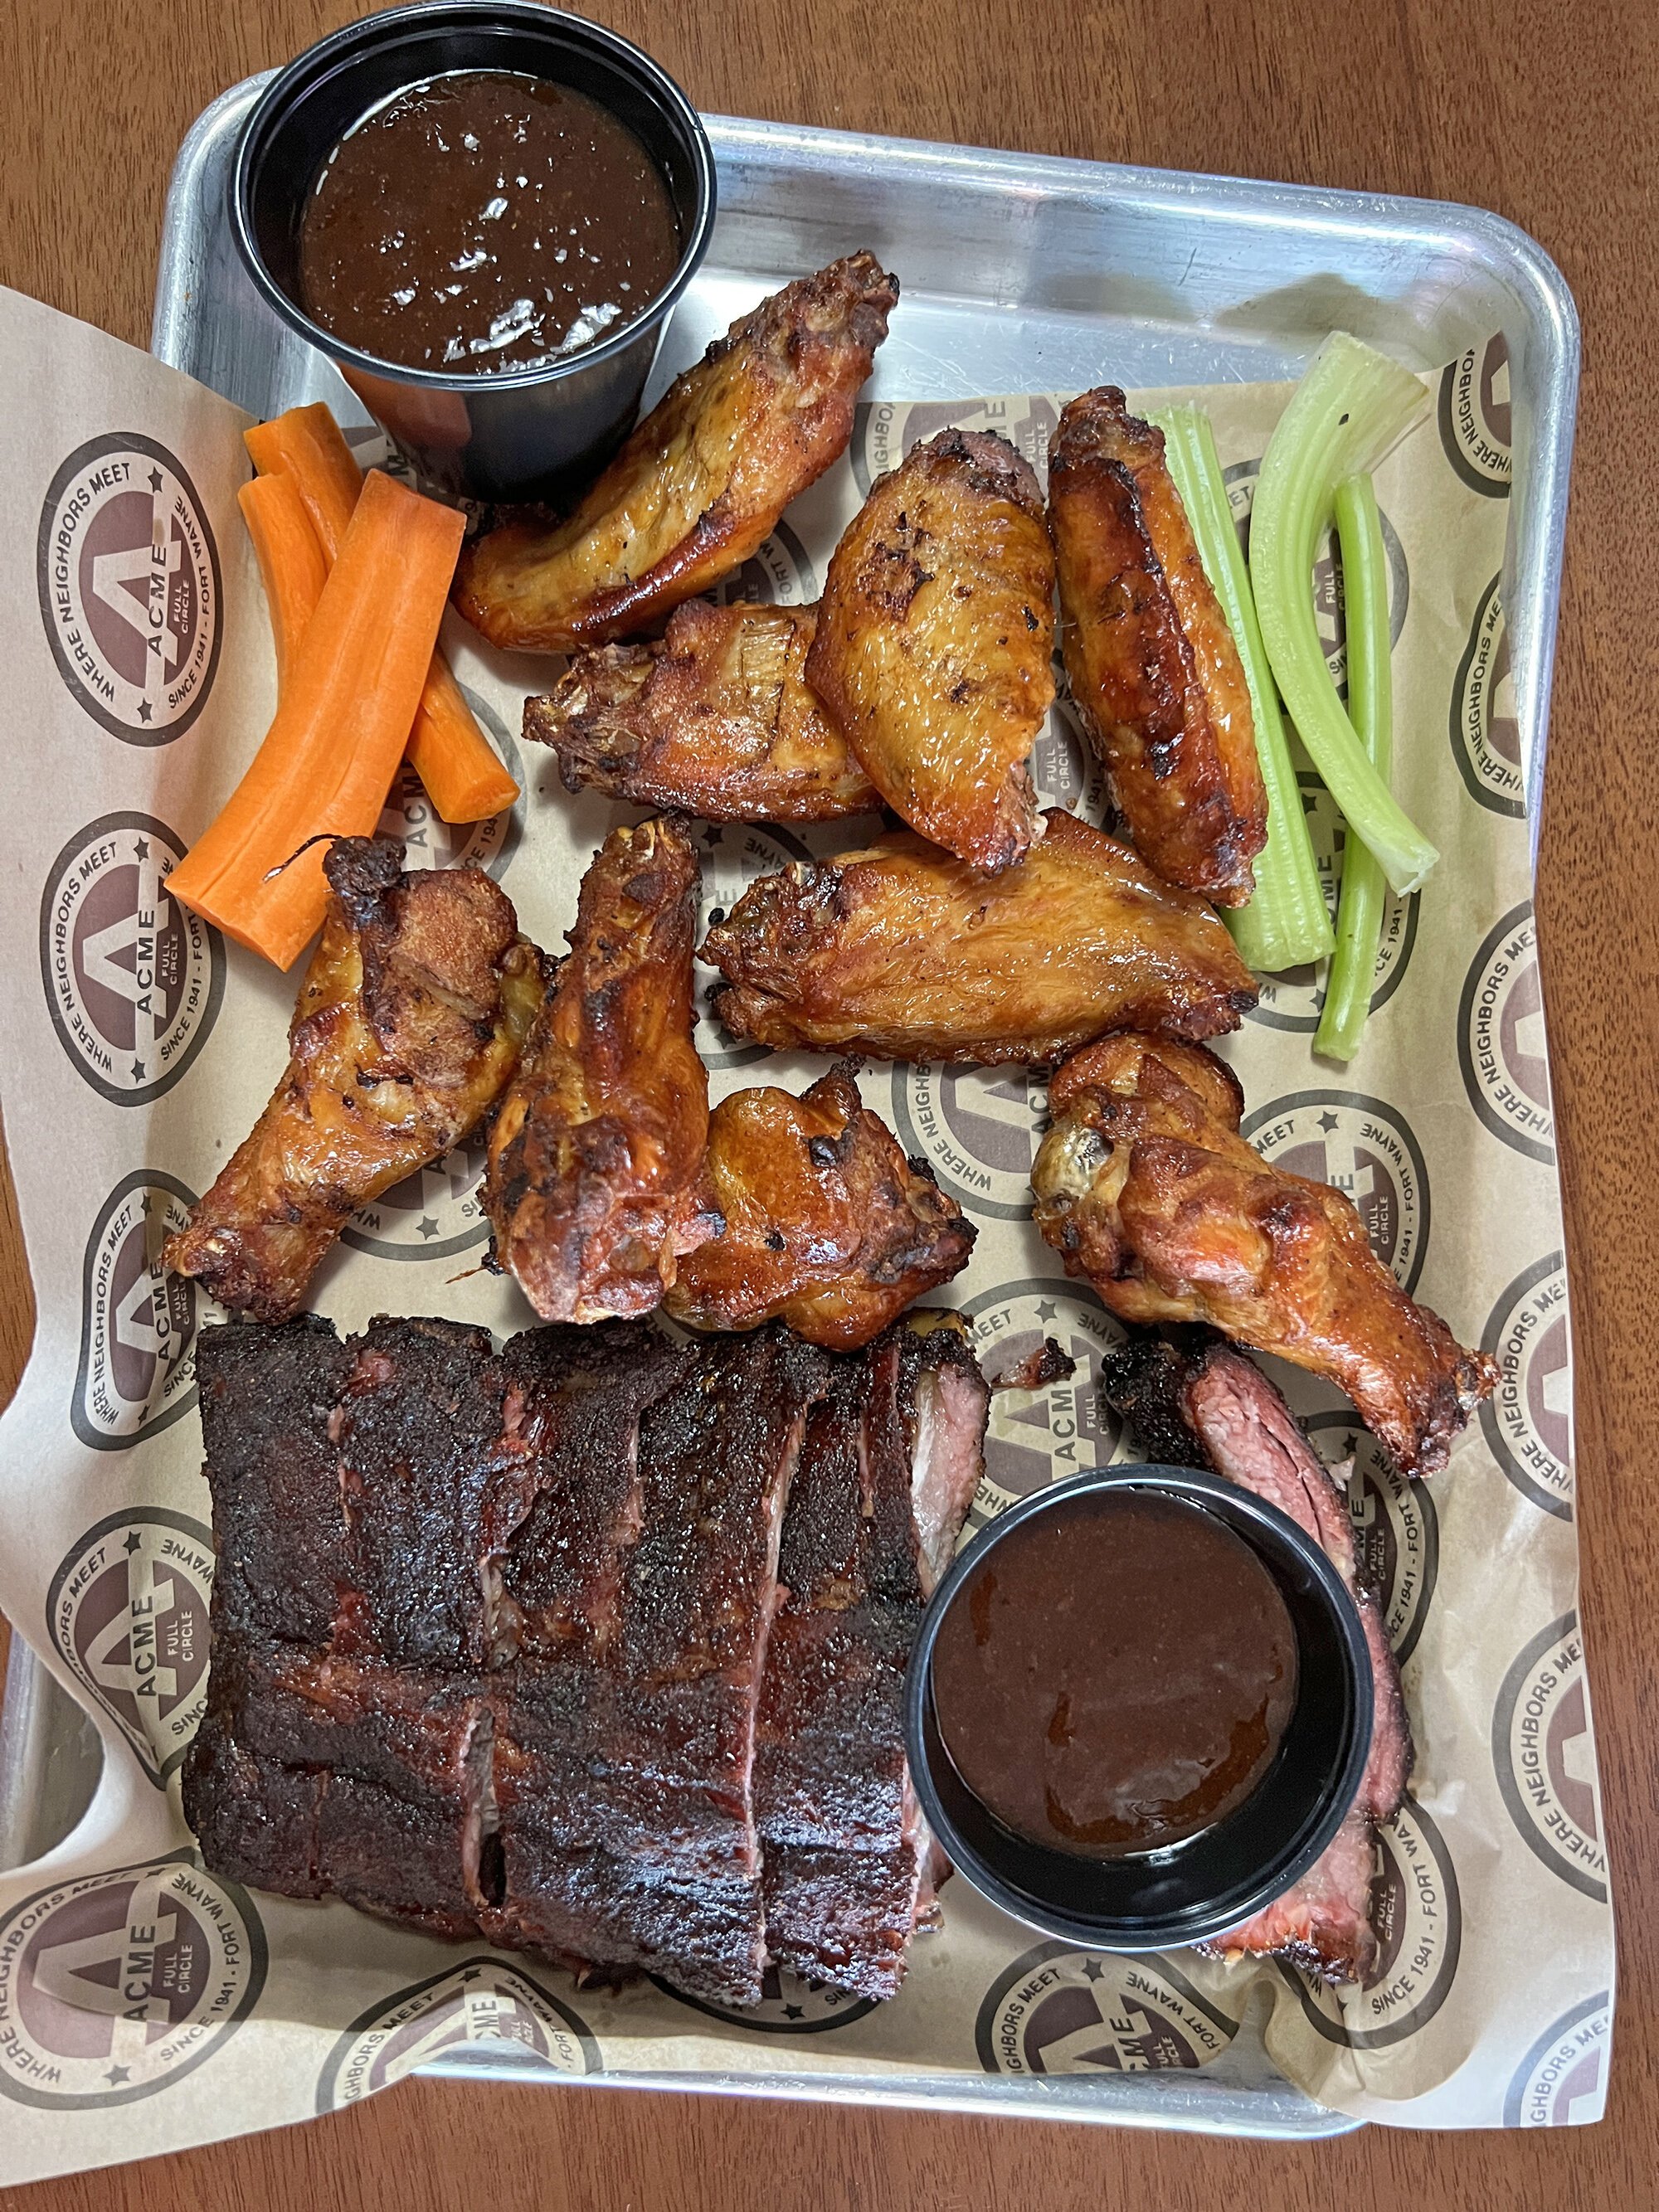 Smoked wings and baby back ribs from ACME by Full Circle BBQ.